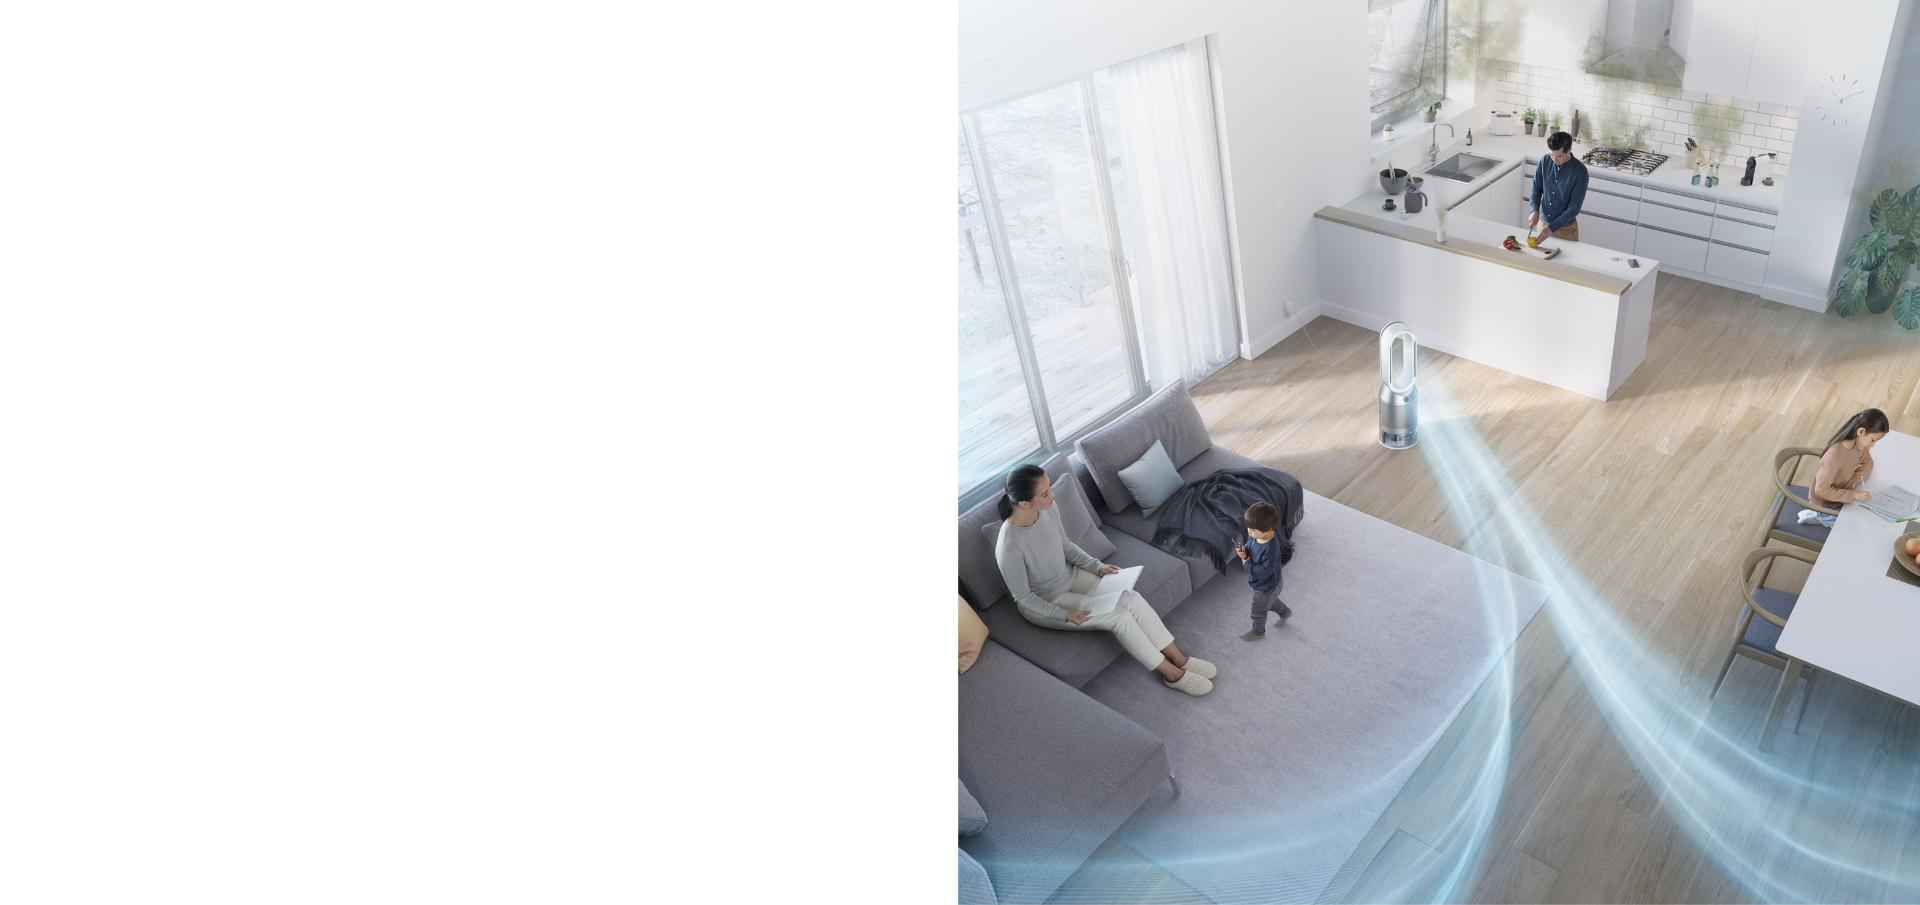 Aerial view of living space with the Dyson purifier humidifier